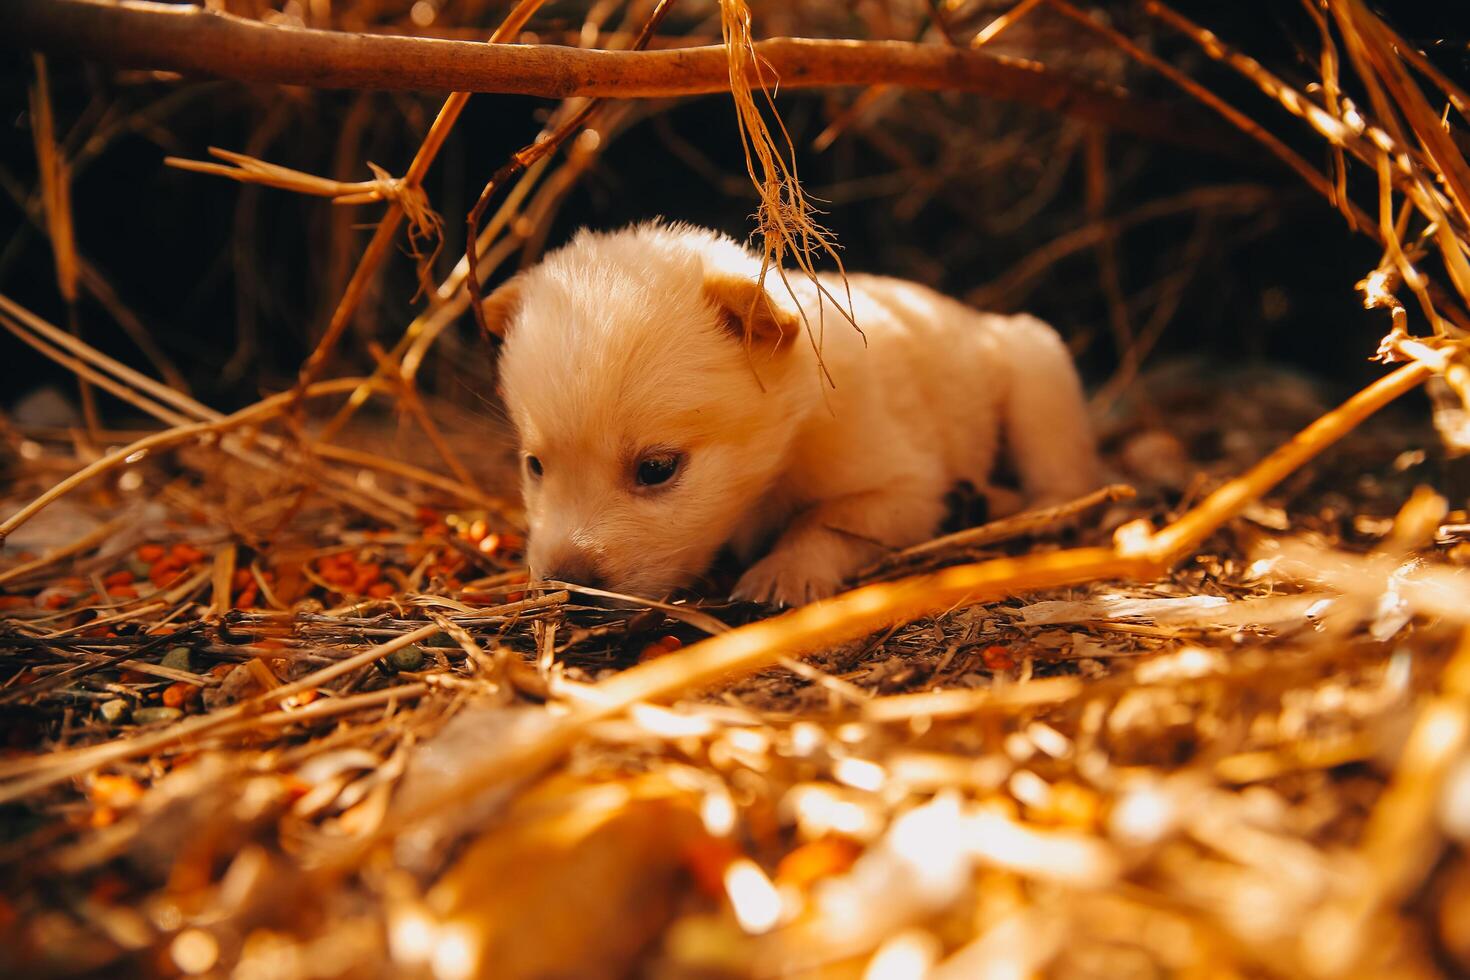 There are many puppies in the forest photo